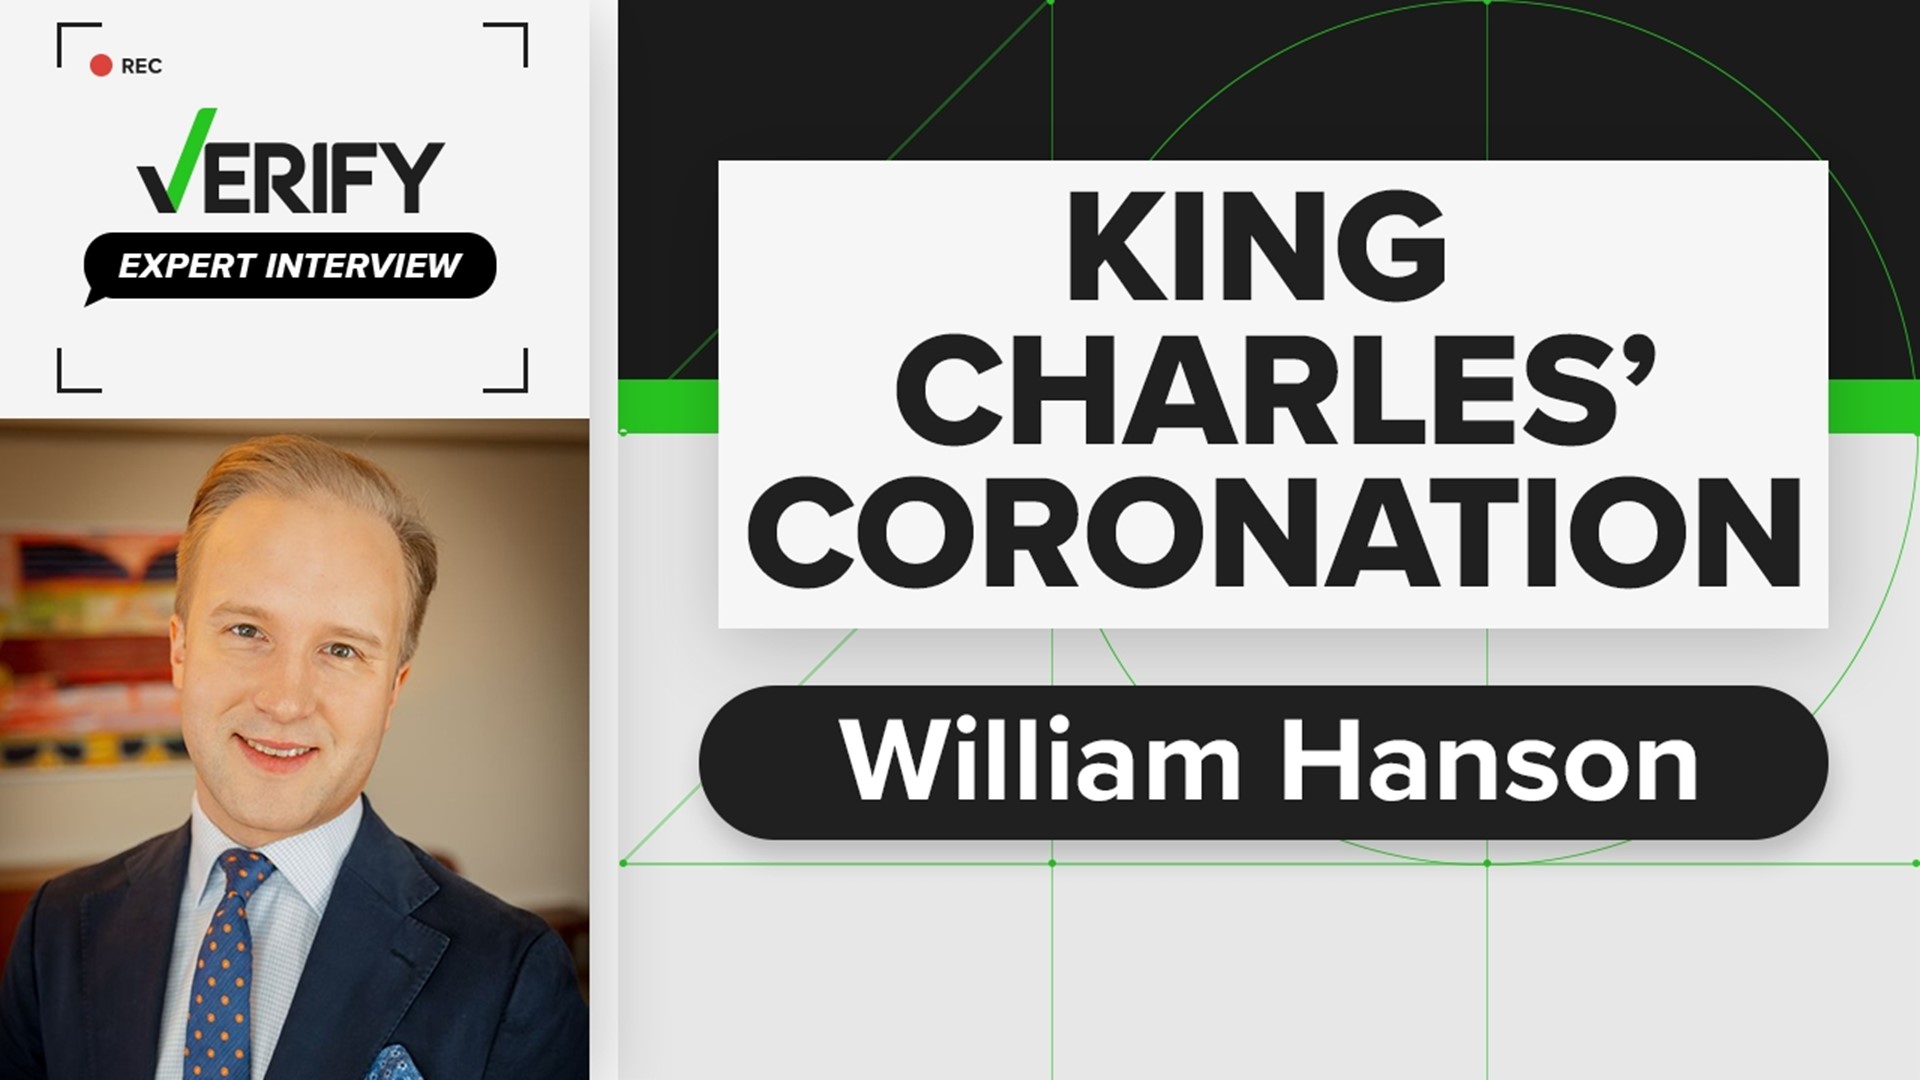 William Hanson, Etiquette Coach and Director of The English Manor, talks through British royal etiquette, King Charles’ coronation.